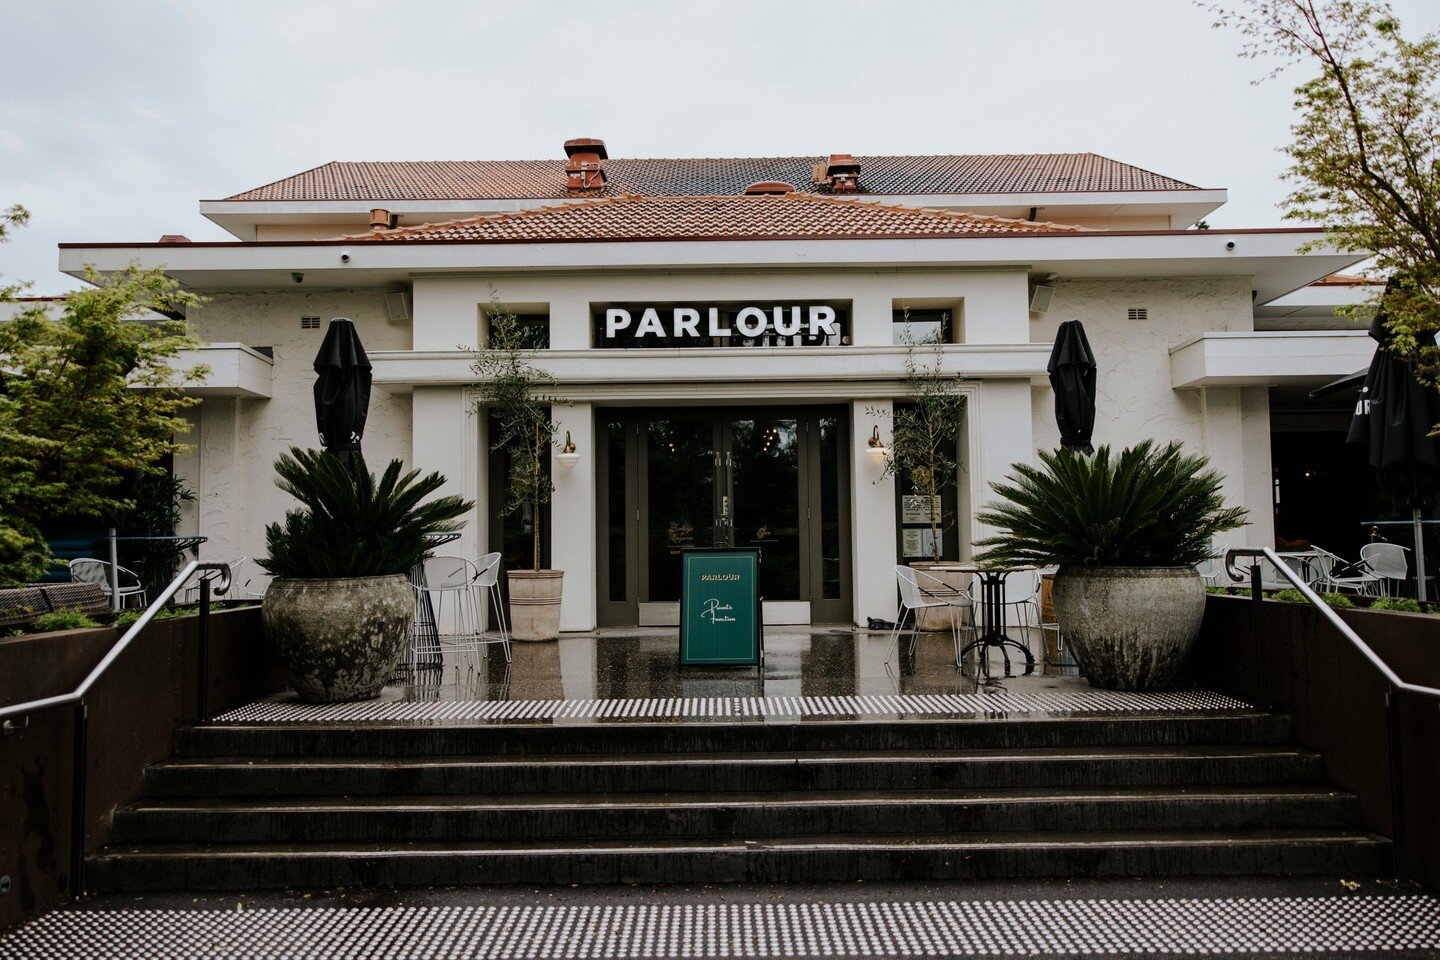 One of my favourite wedding venues to perform at. Shout out to the amazing staff at @Parlour - Really looking forward to seeing you all again real soon! 🧡⁠
⁠
📍@parlourdining⁠
📷 @allgrownupweddings⁠
.⁠
.⁠
#djtrumpet #djsaxwedding #djsaxophone #part